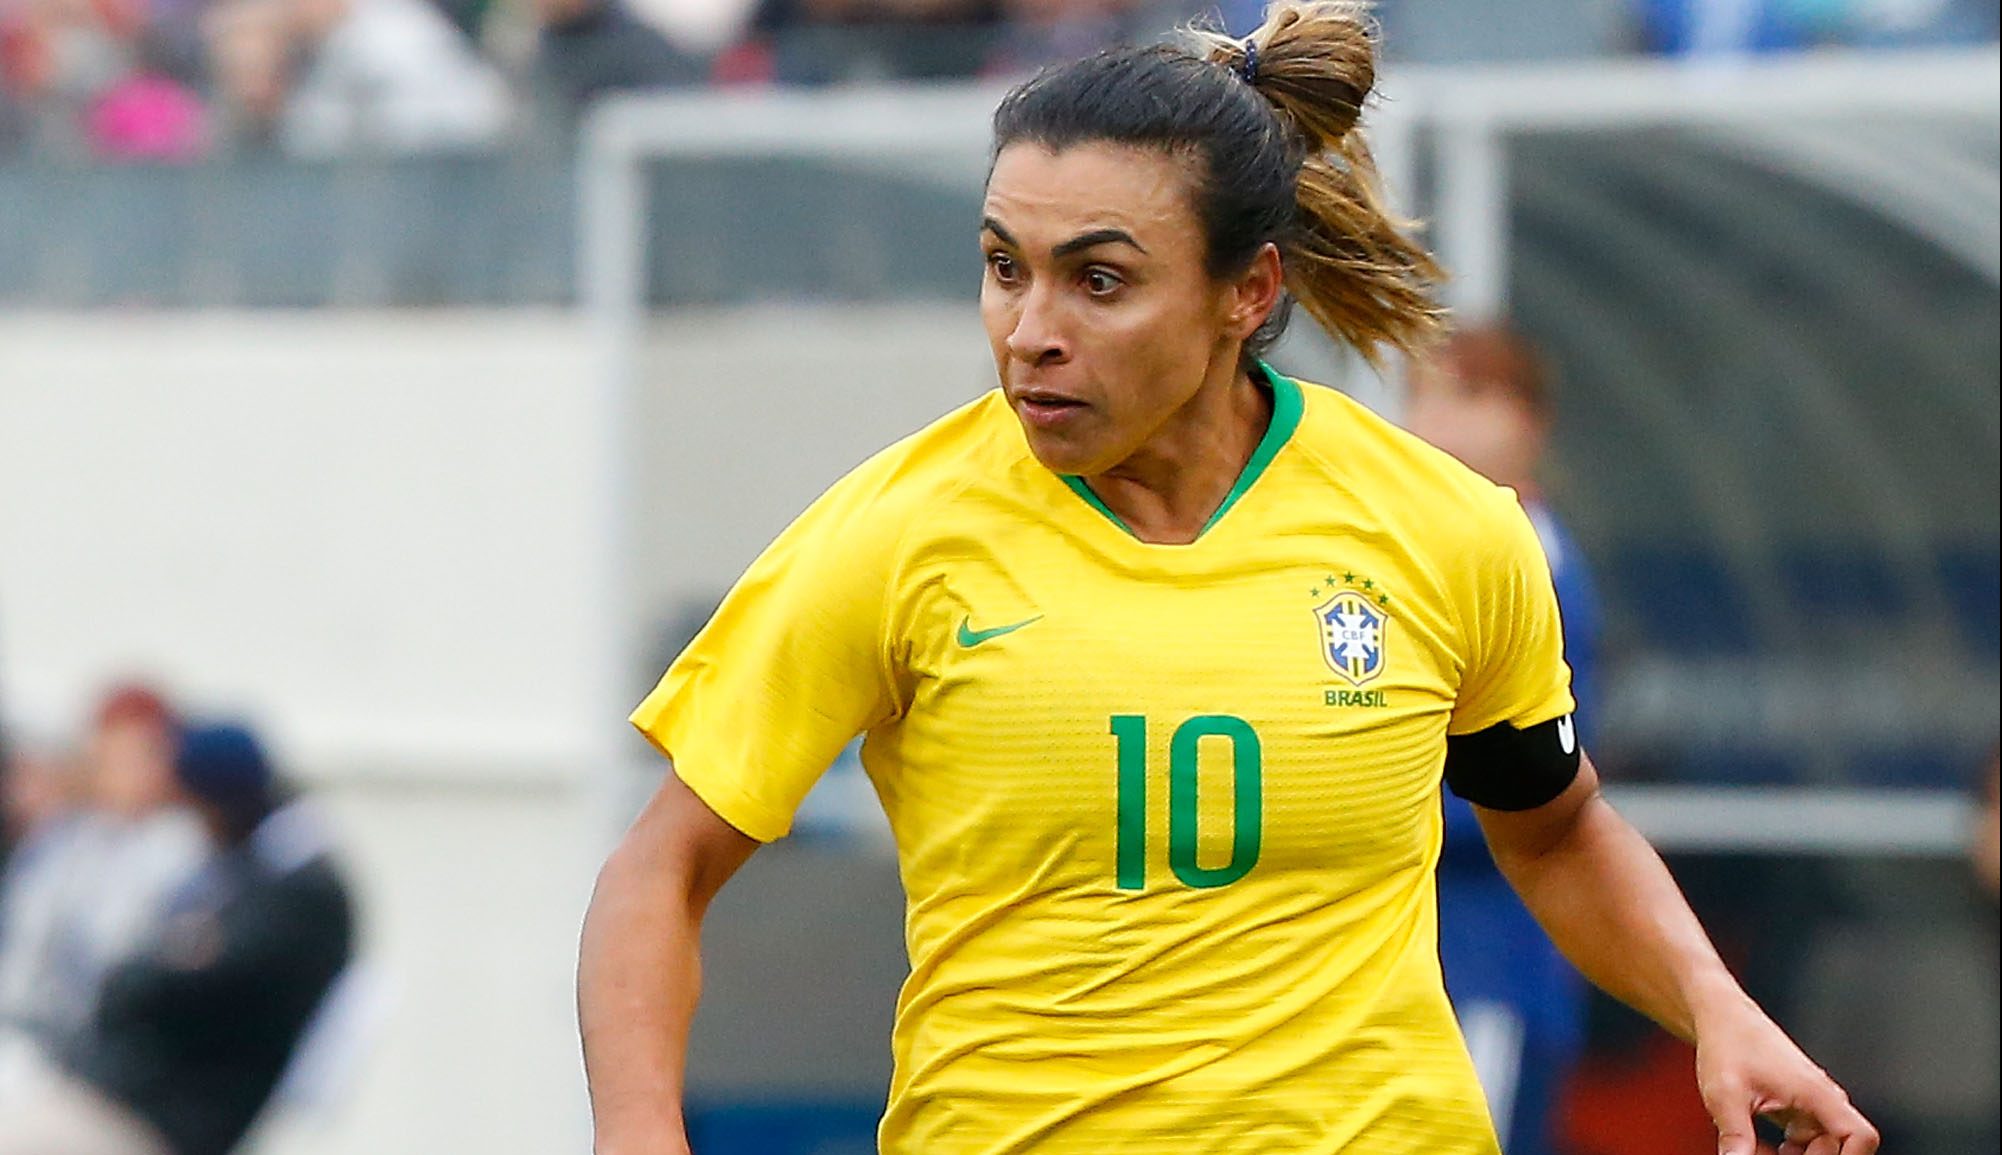 Everything you need to know about the FIFA Women’s World Cup 2019